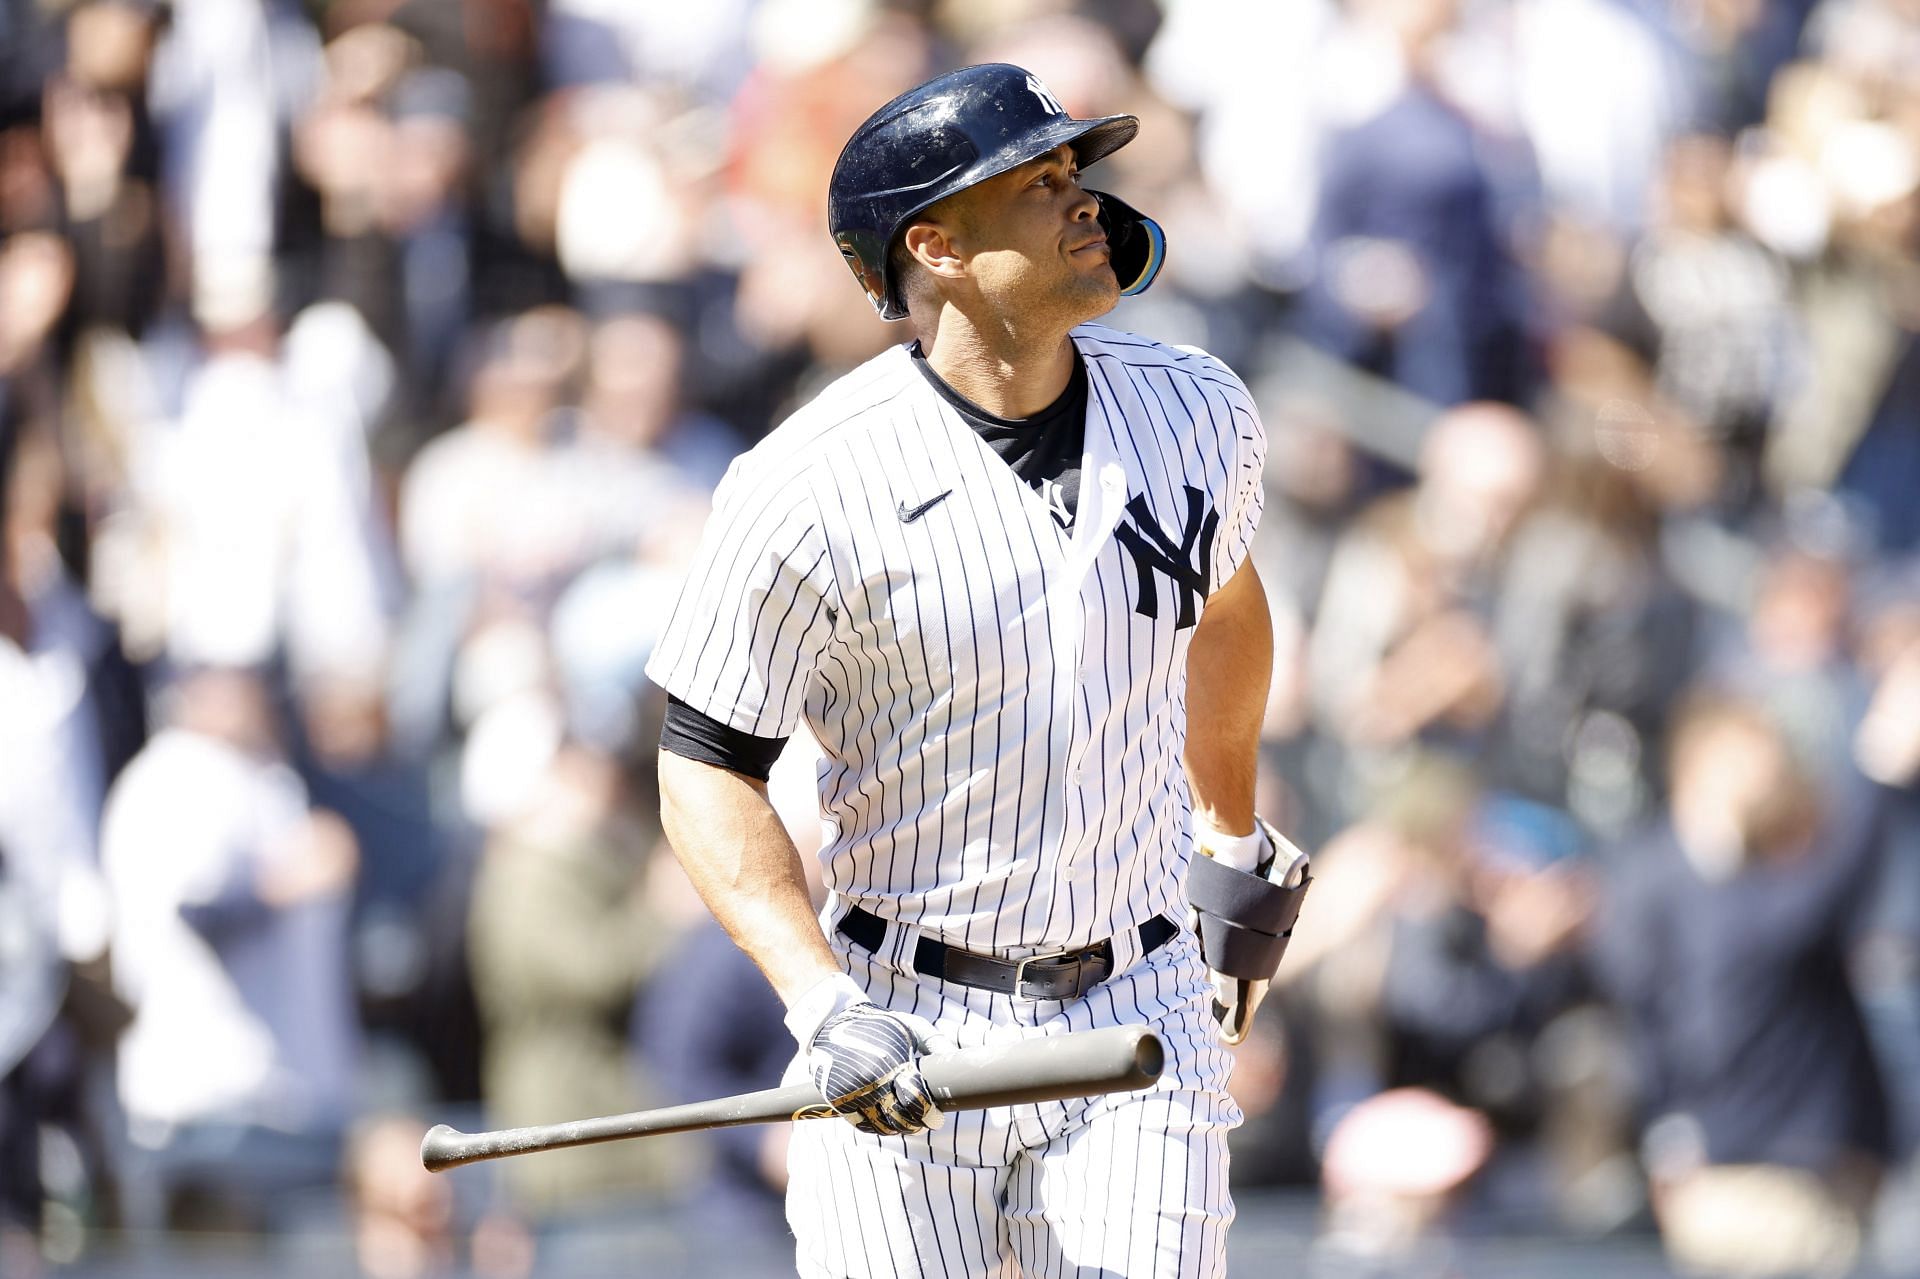 Giancarlo Stanton of the New York Yankees reacts after hitting a home run at Yankee Stadium